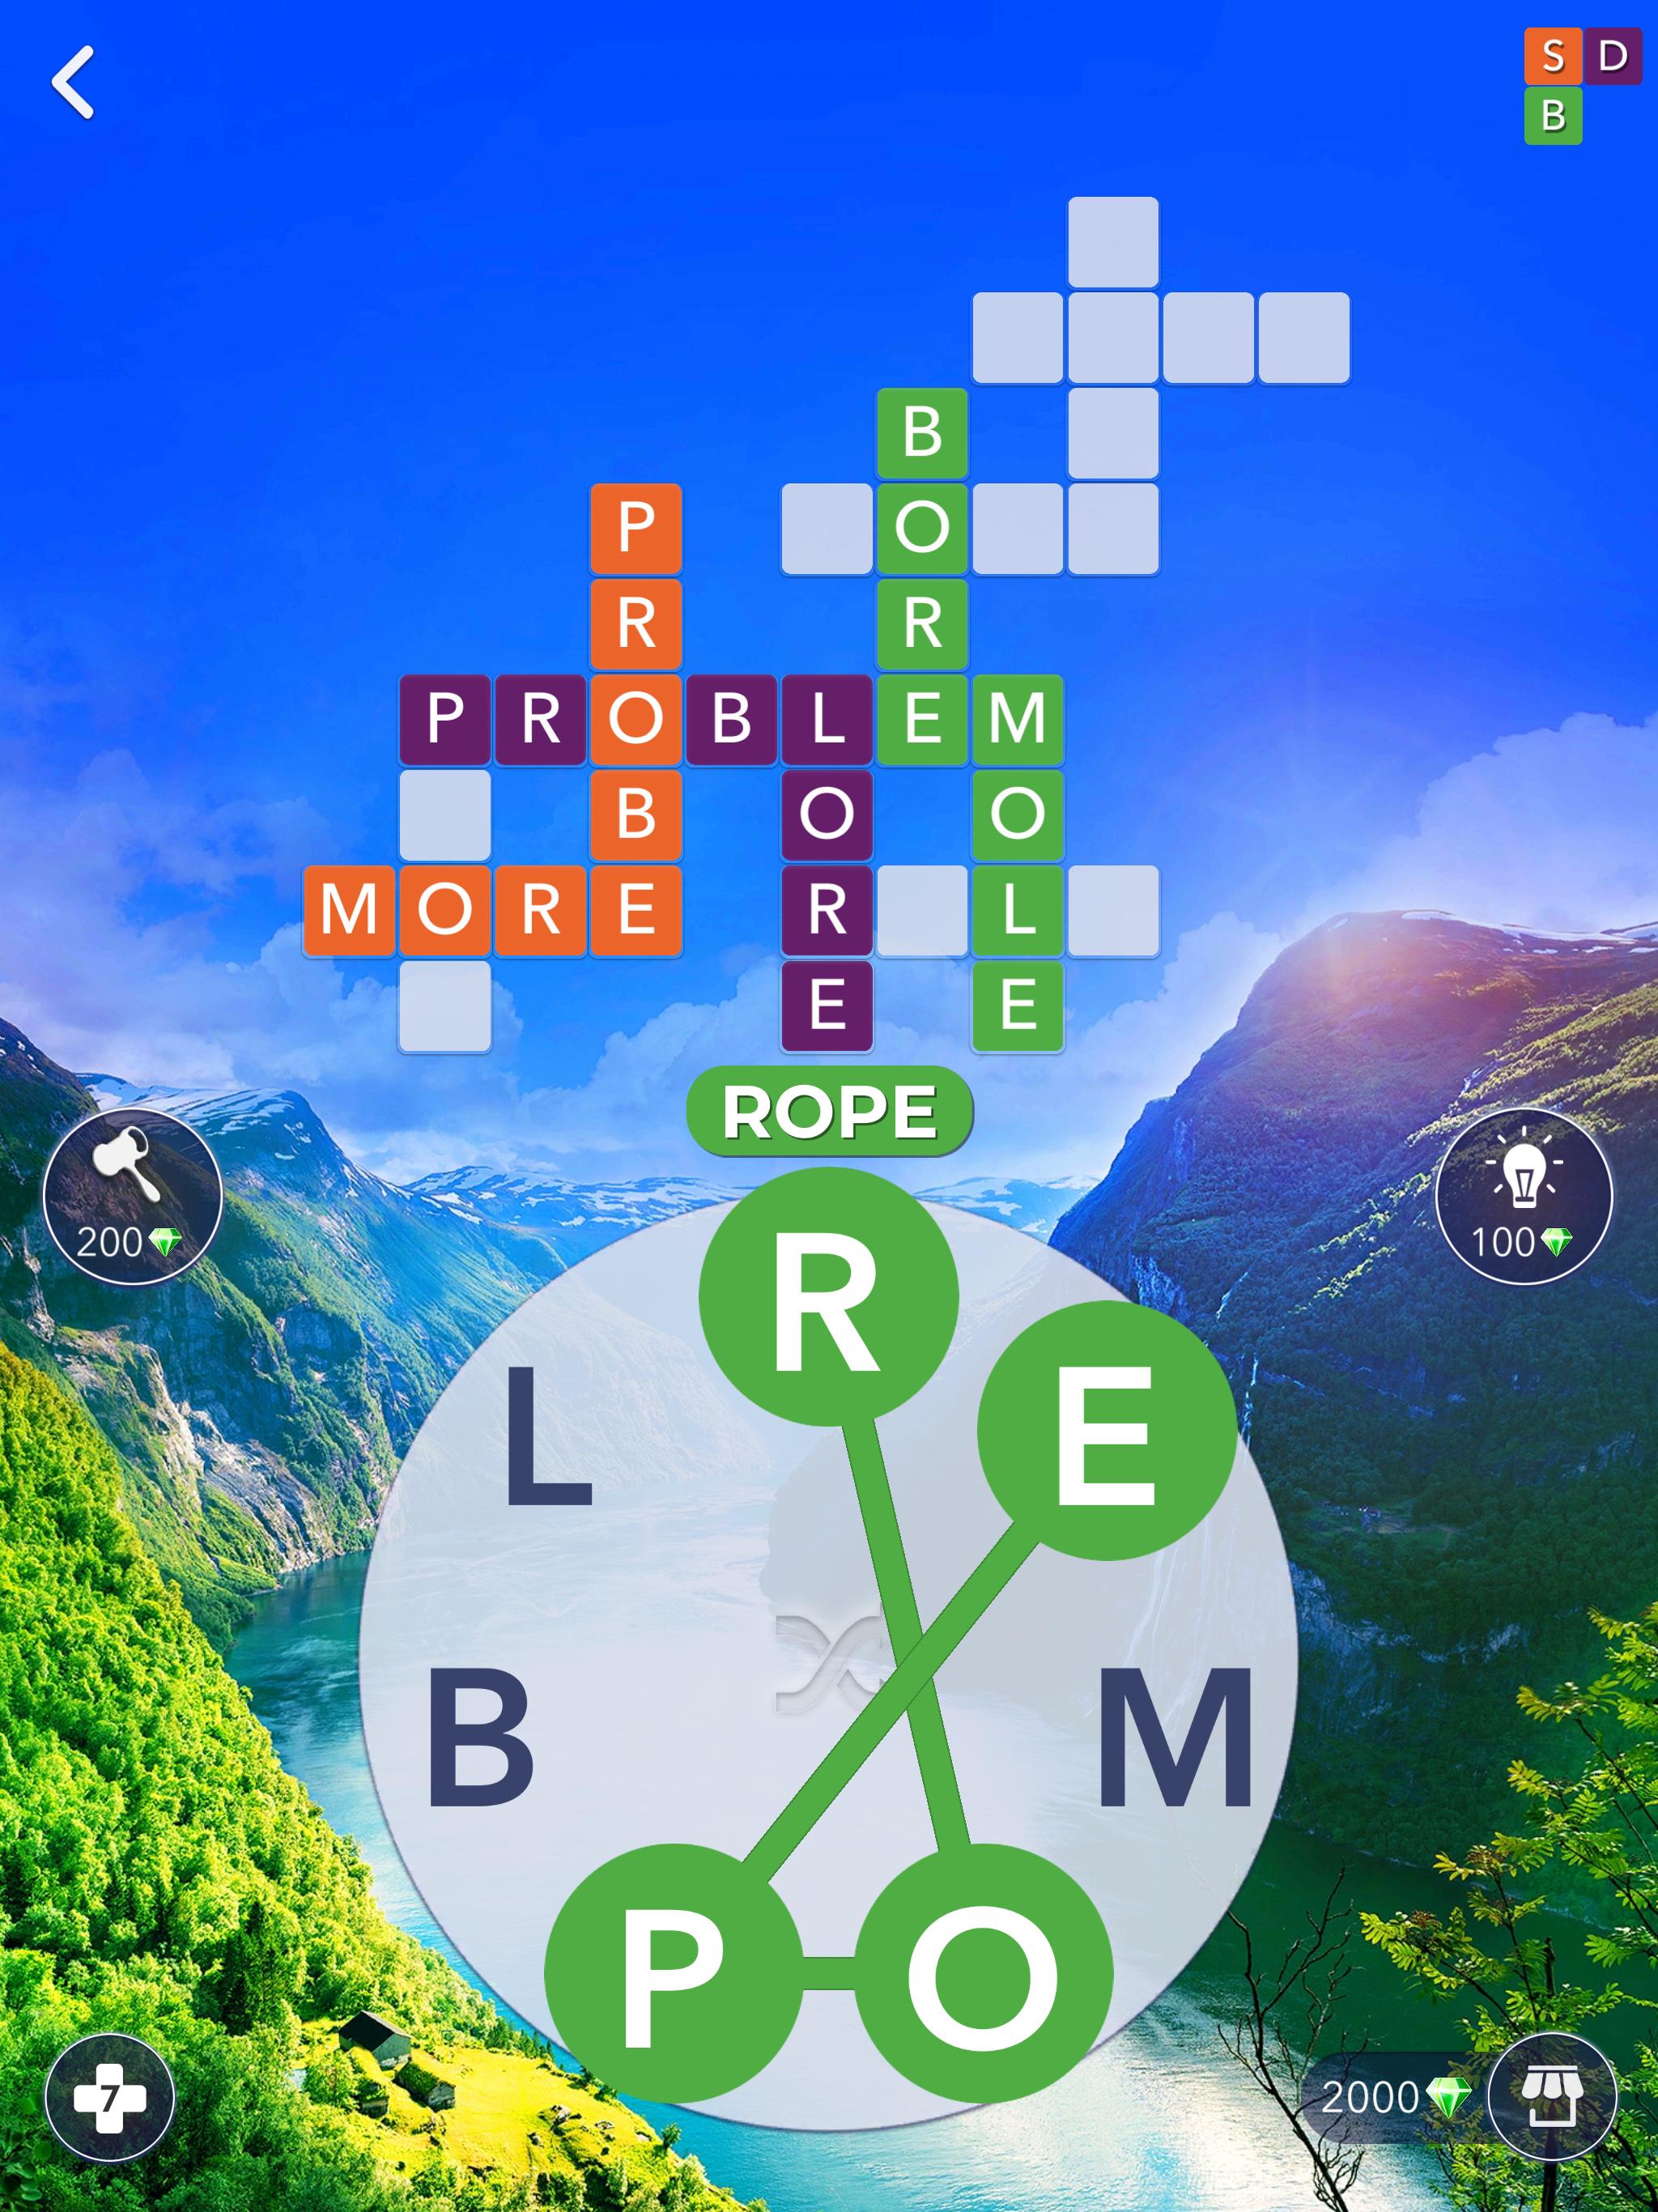 Words of Wonders: Crossword to Connect Vocabulary 2.4.1 Screenshot 20